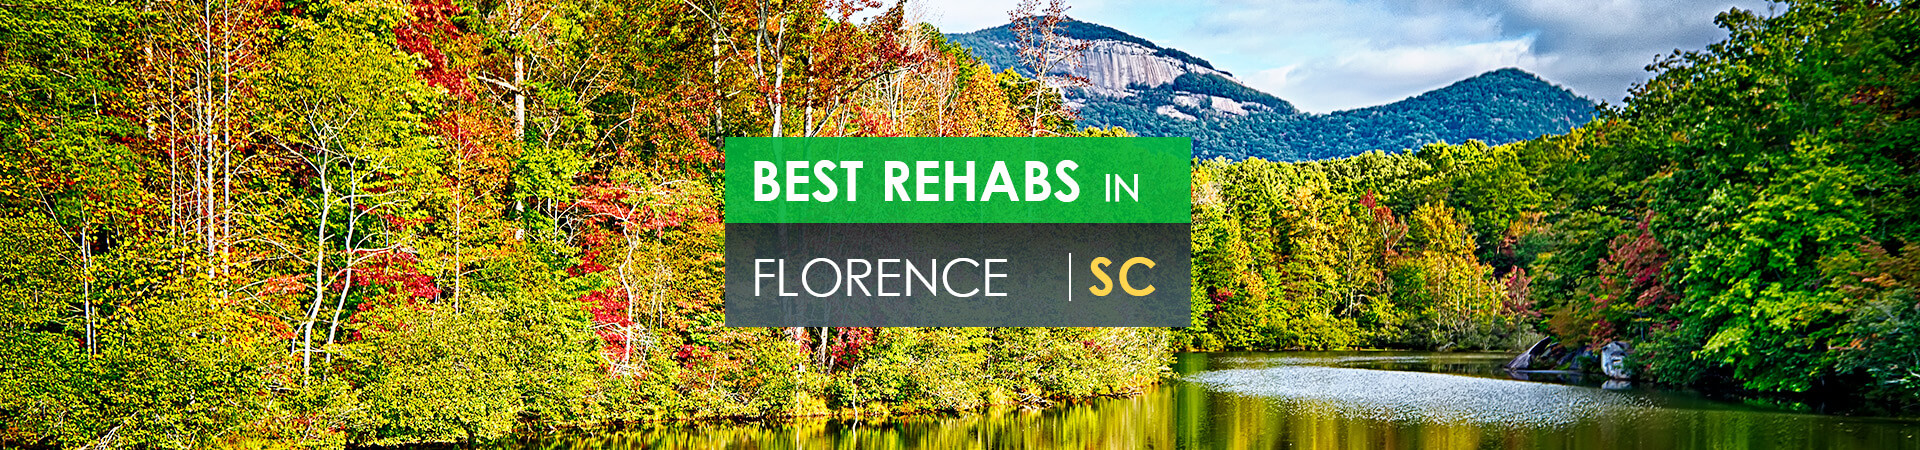 Best rehabs in Florence, SC